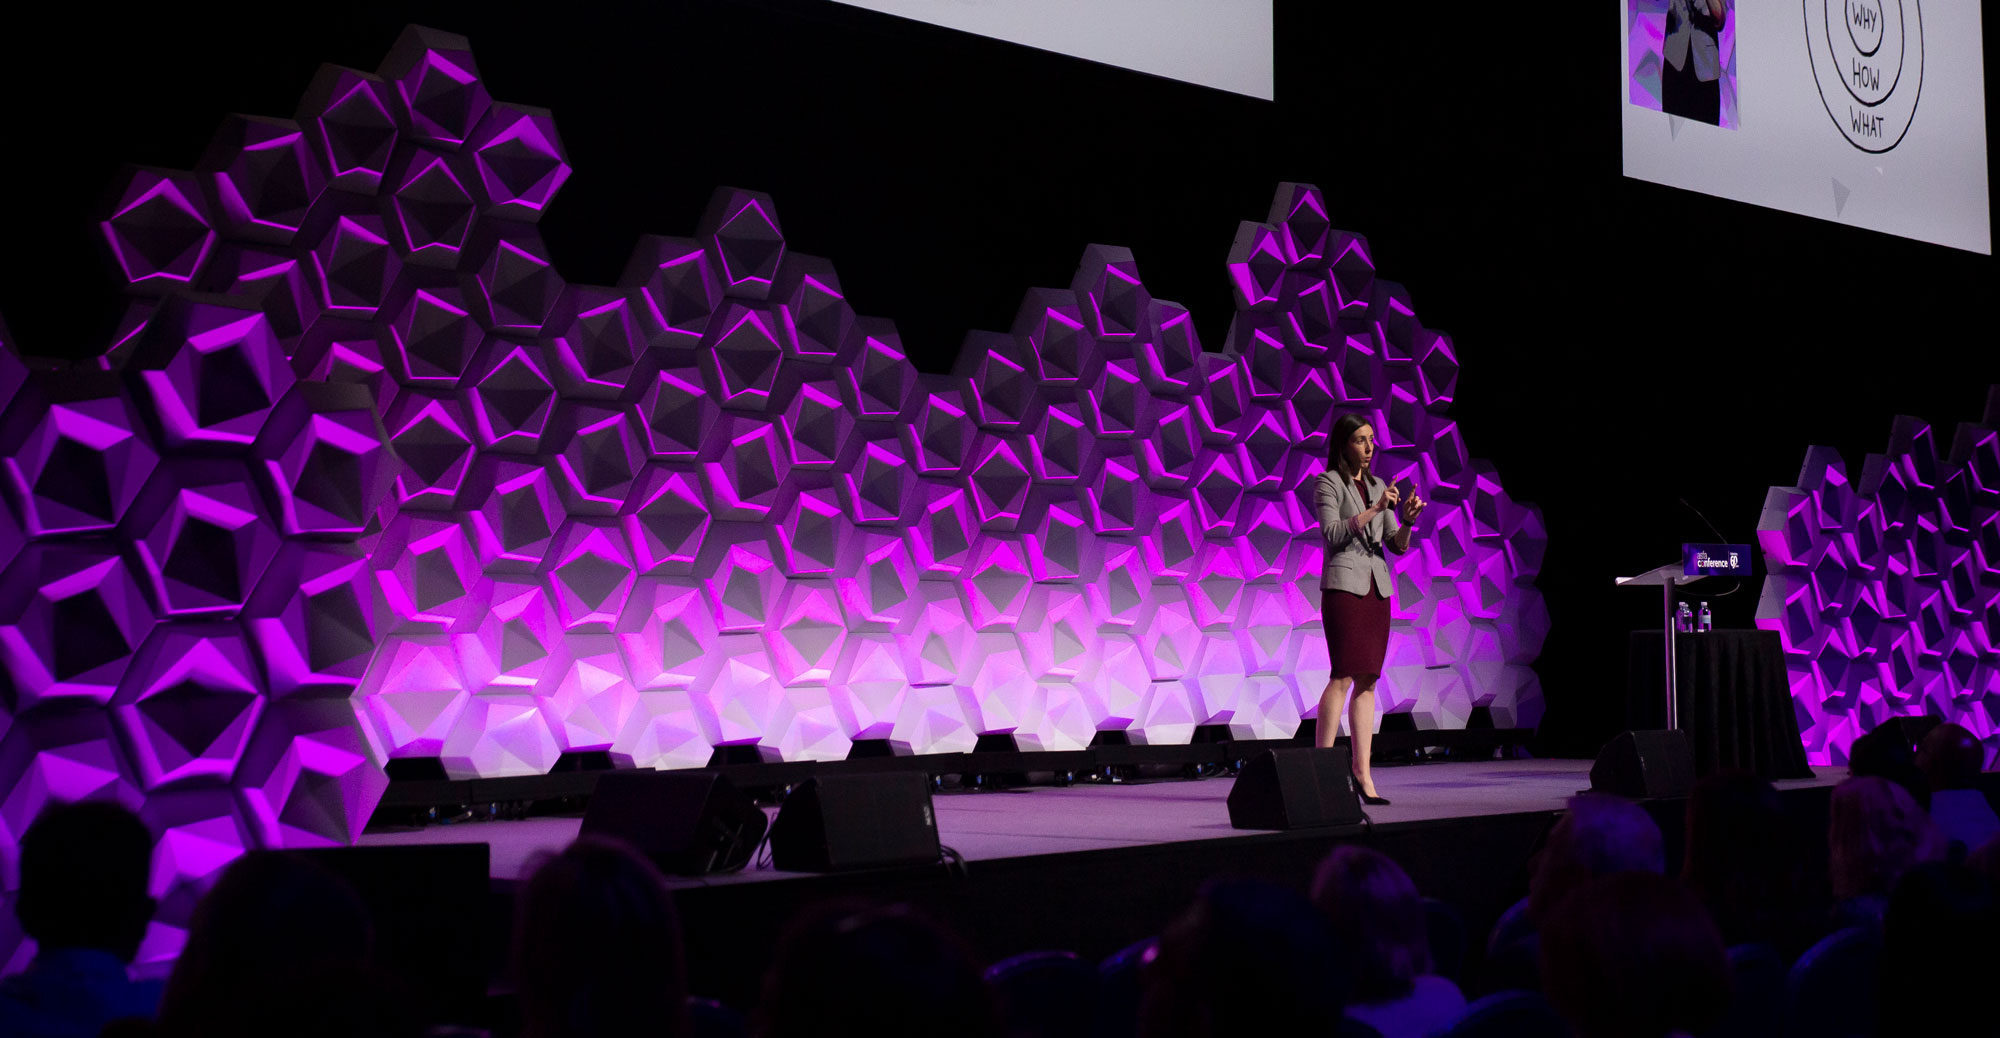 Holly Ransom speaking on stage against a purple geometric backdrop